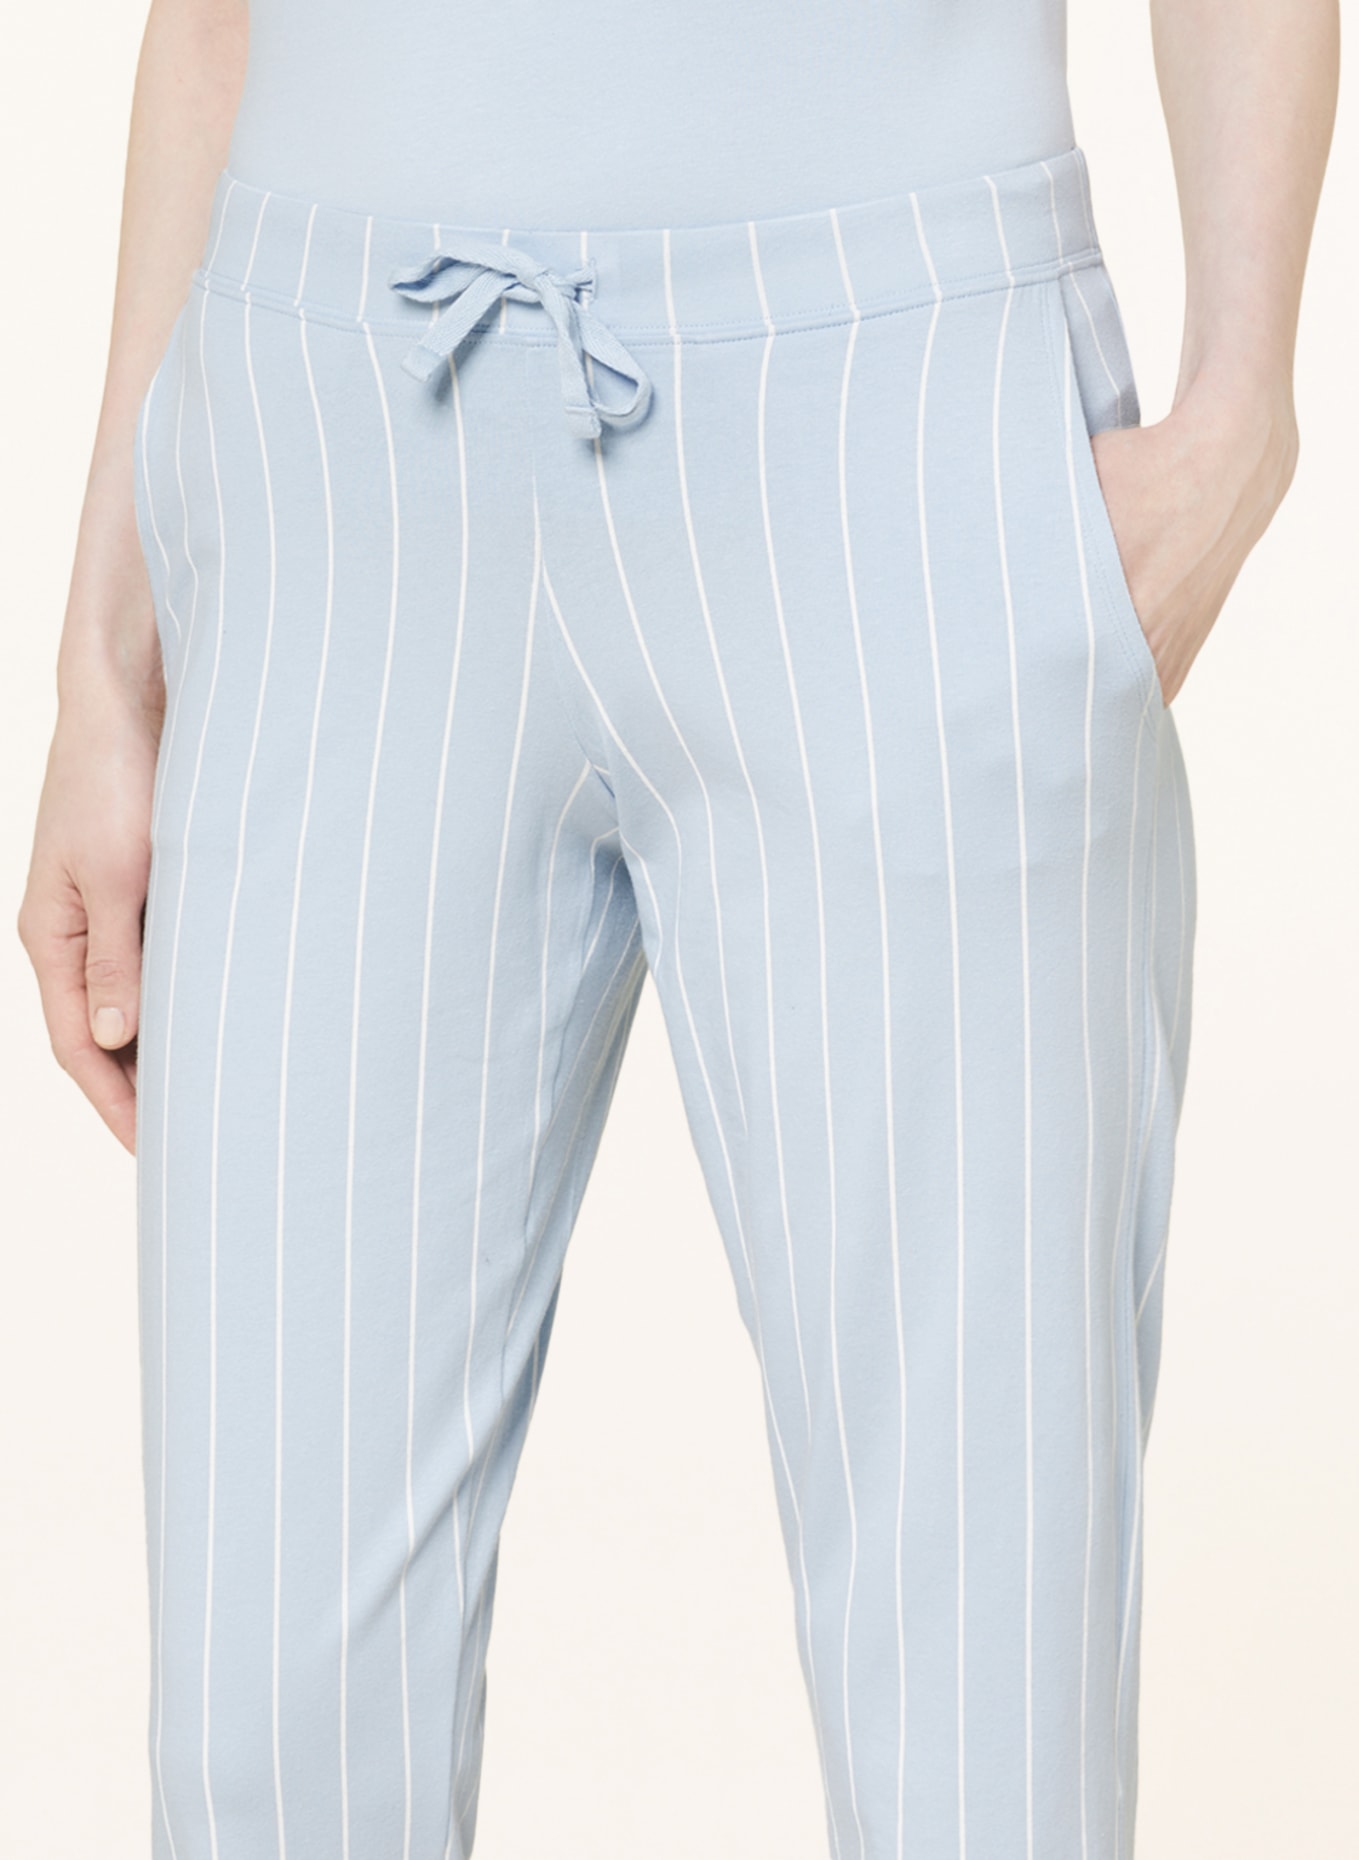 SCHIESSER 3/4 pajama pants MIX+RELAX, Color: LIGHT BLUE/ WHITE (Image 5)